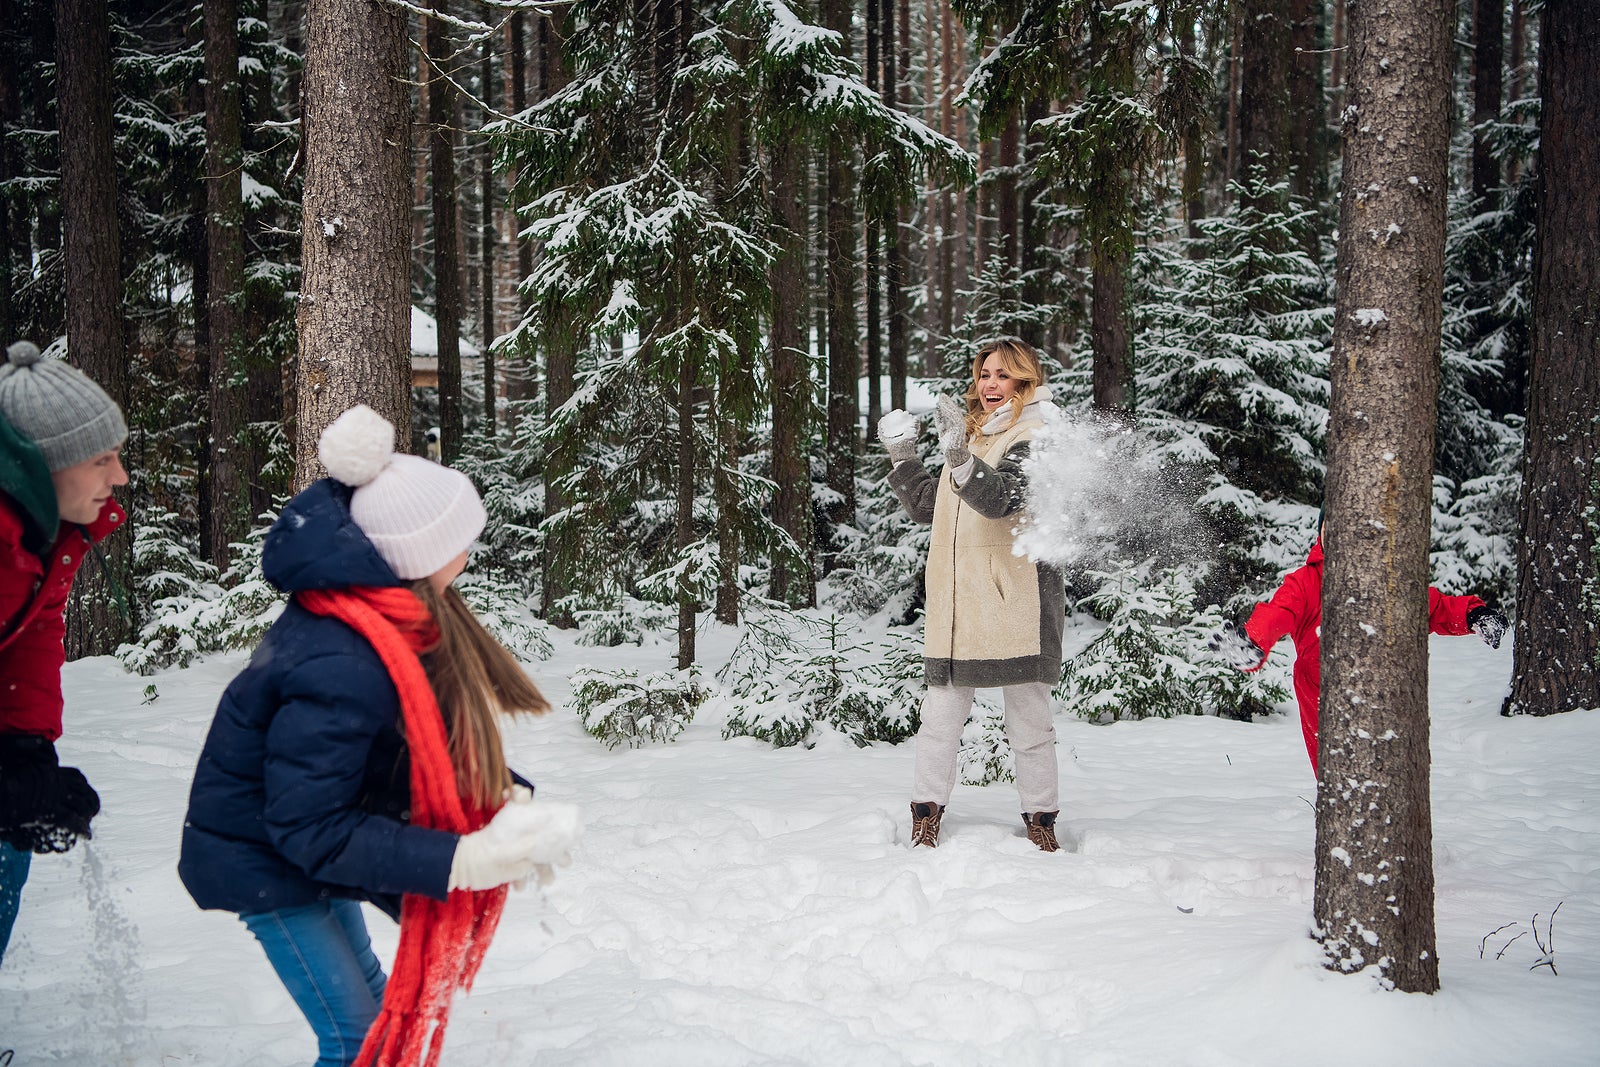 Mom, dad, son and daughter decided to play snowballs between the trees in the snow.